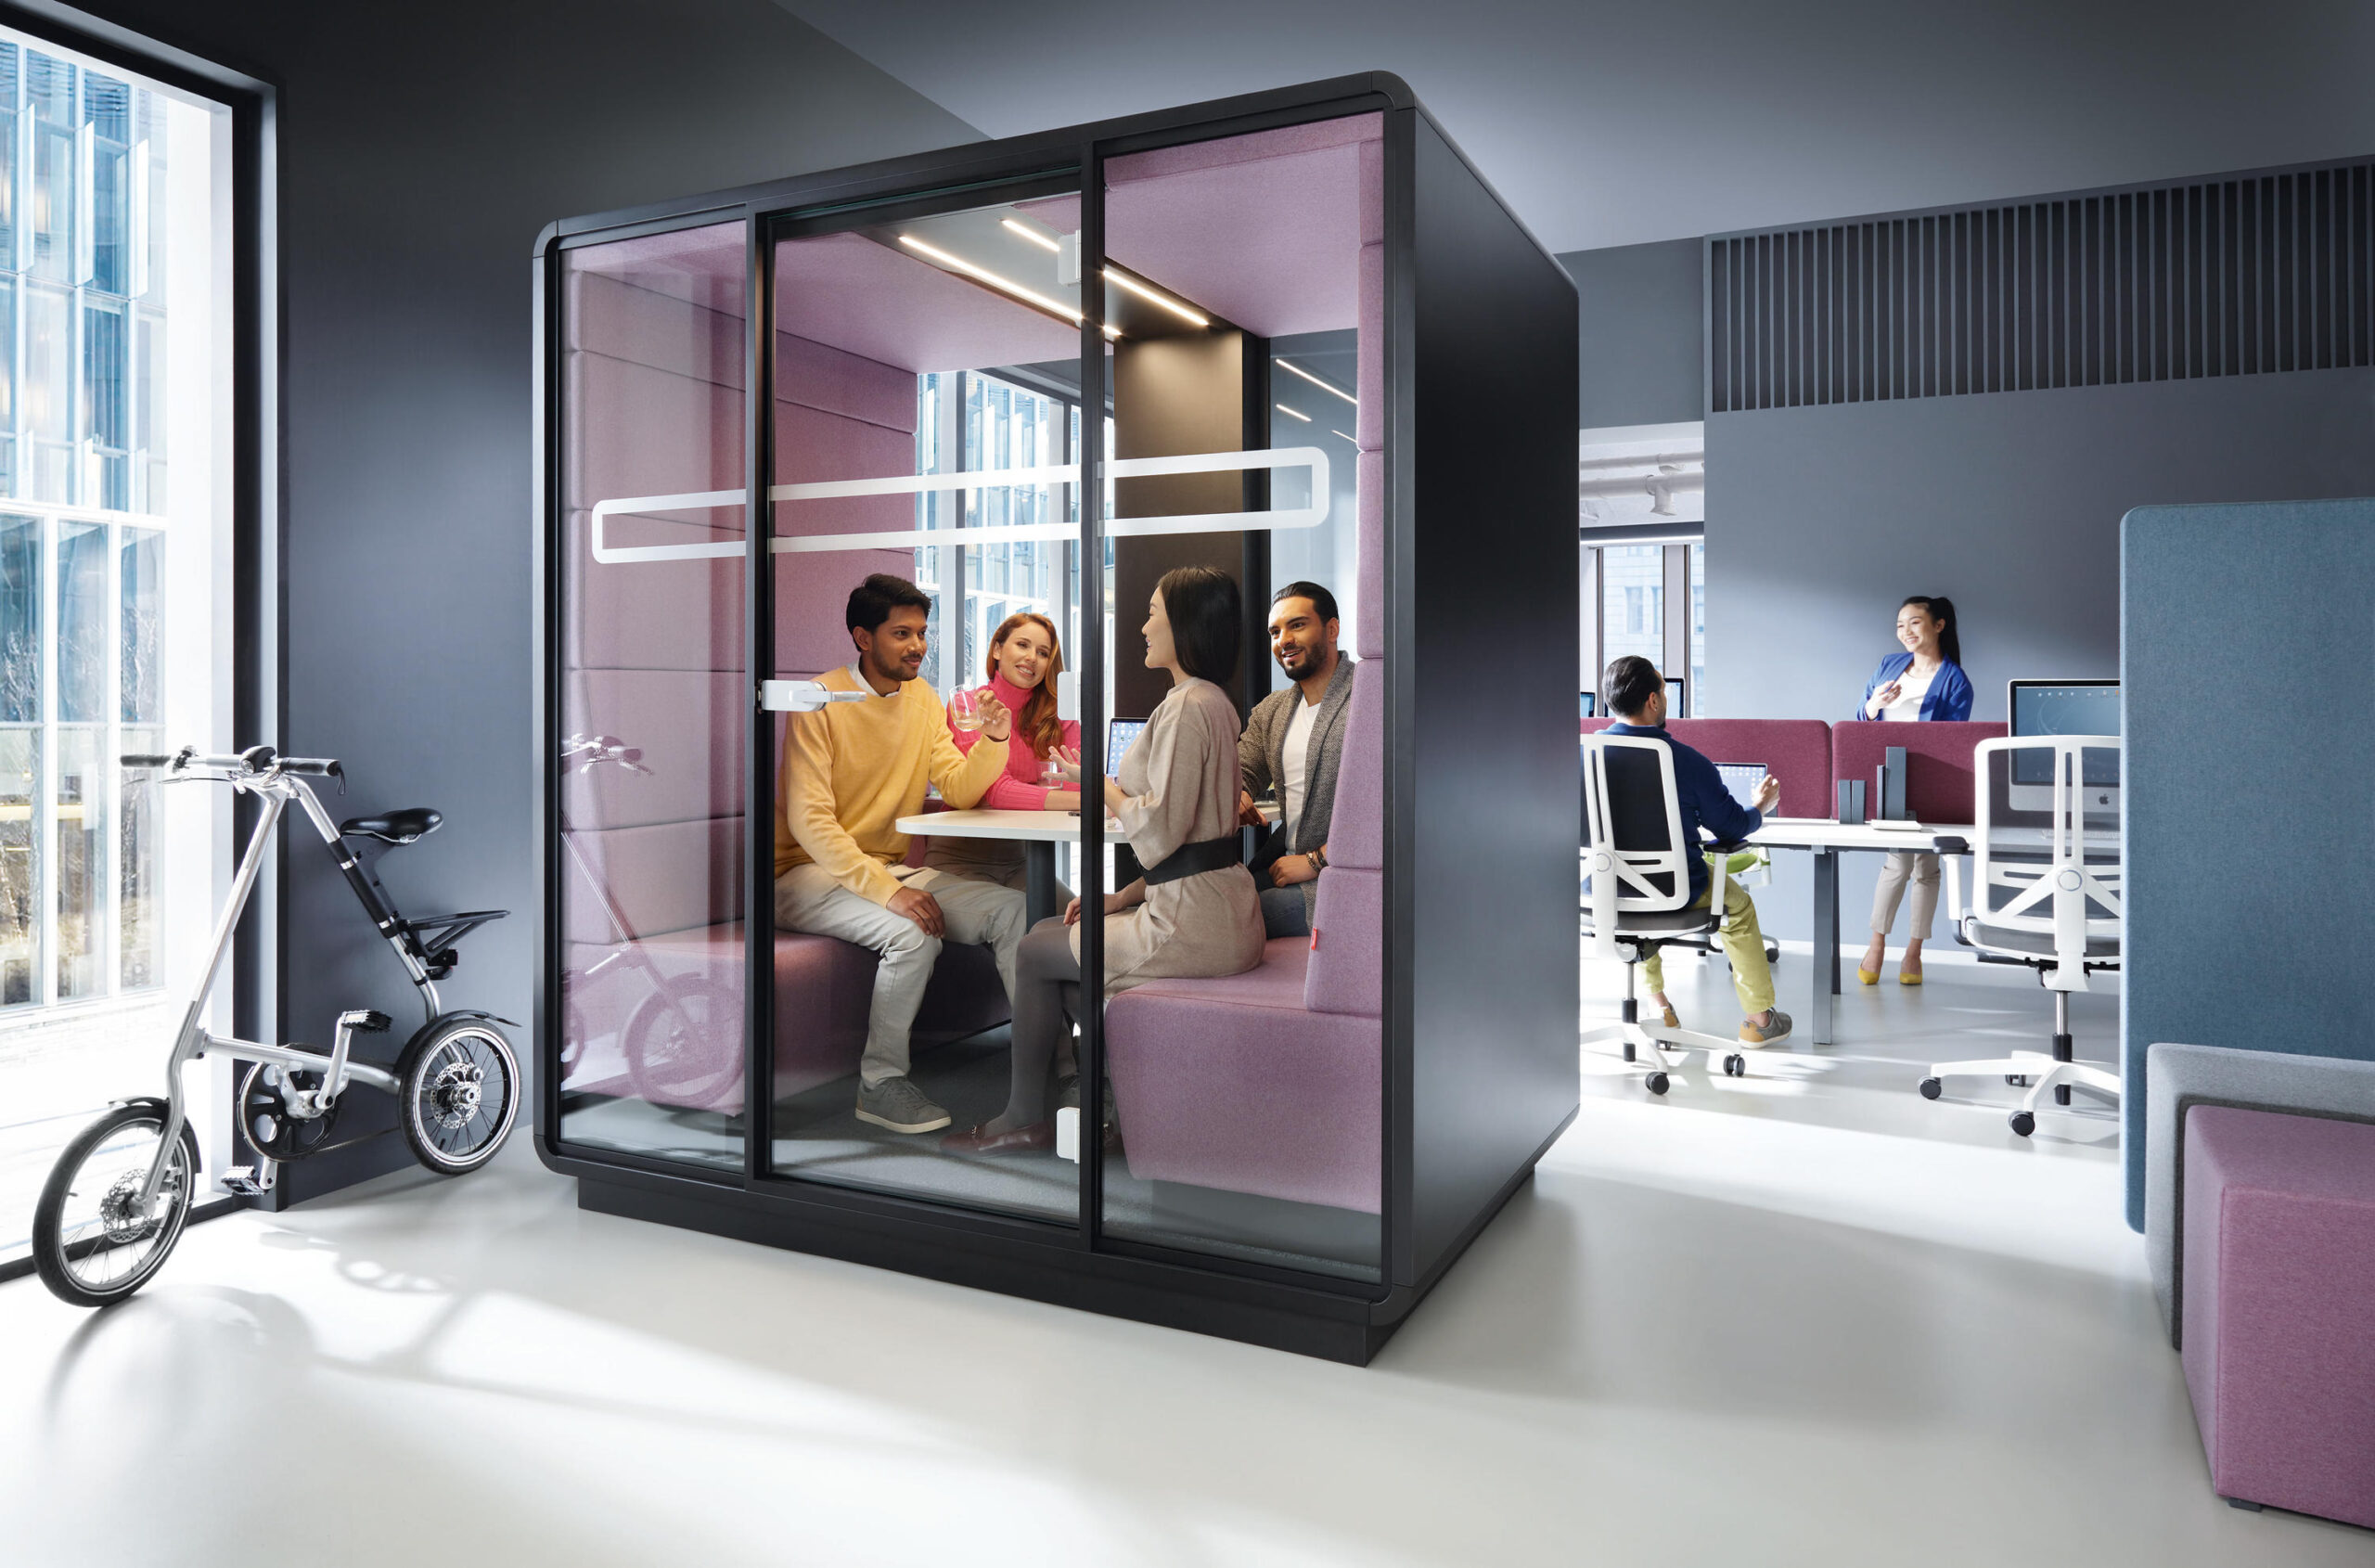 The Benefits of Privacy Pods in Open Office Environments